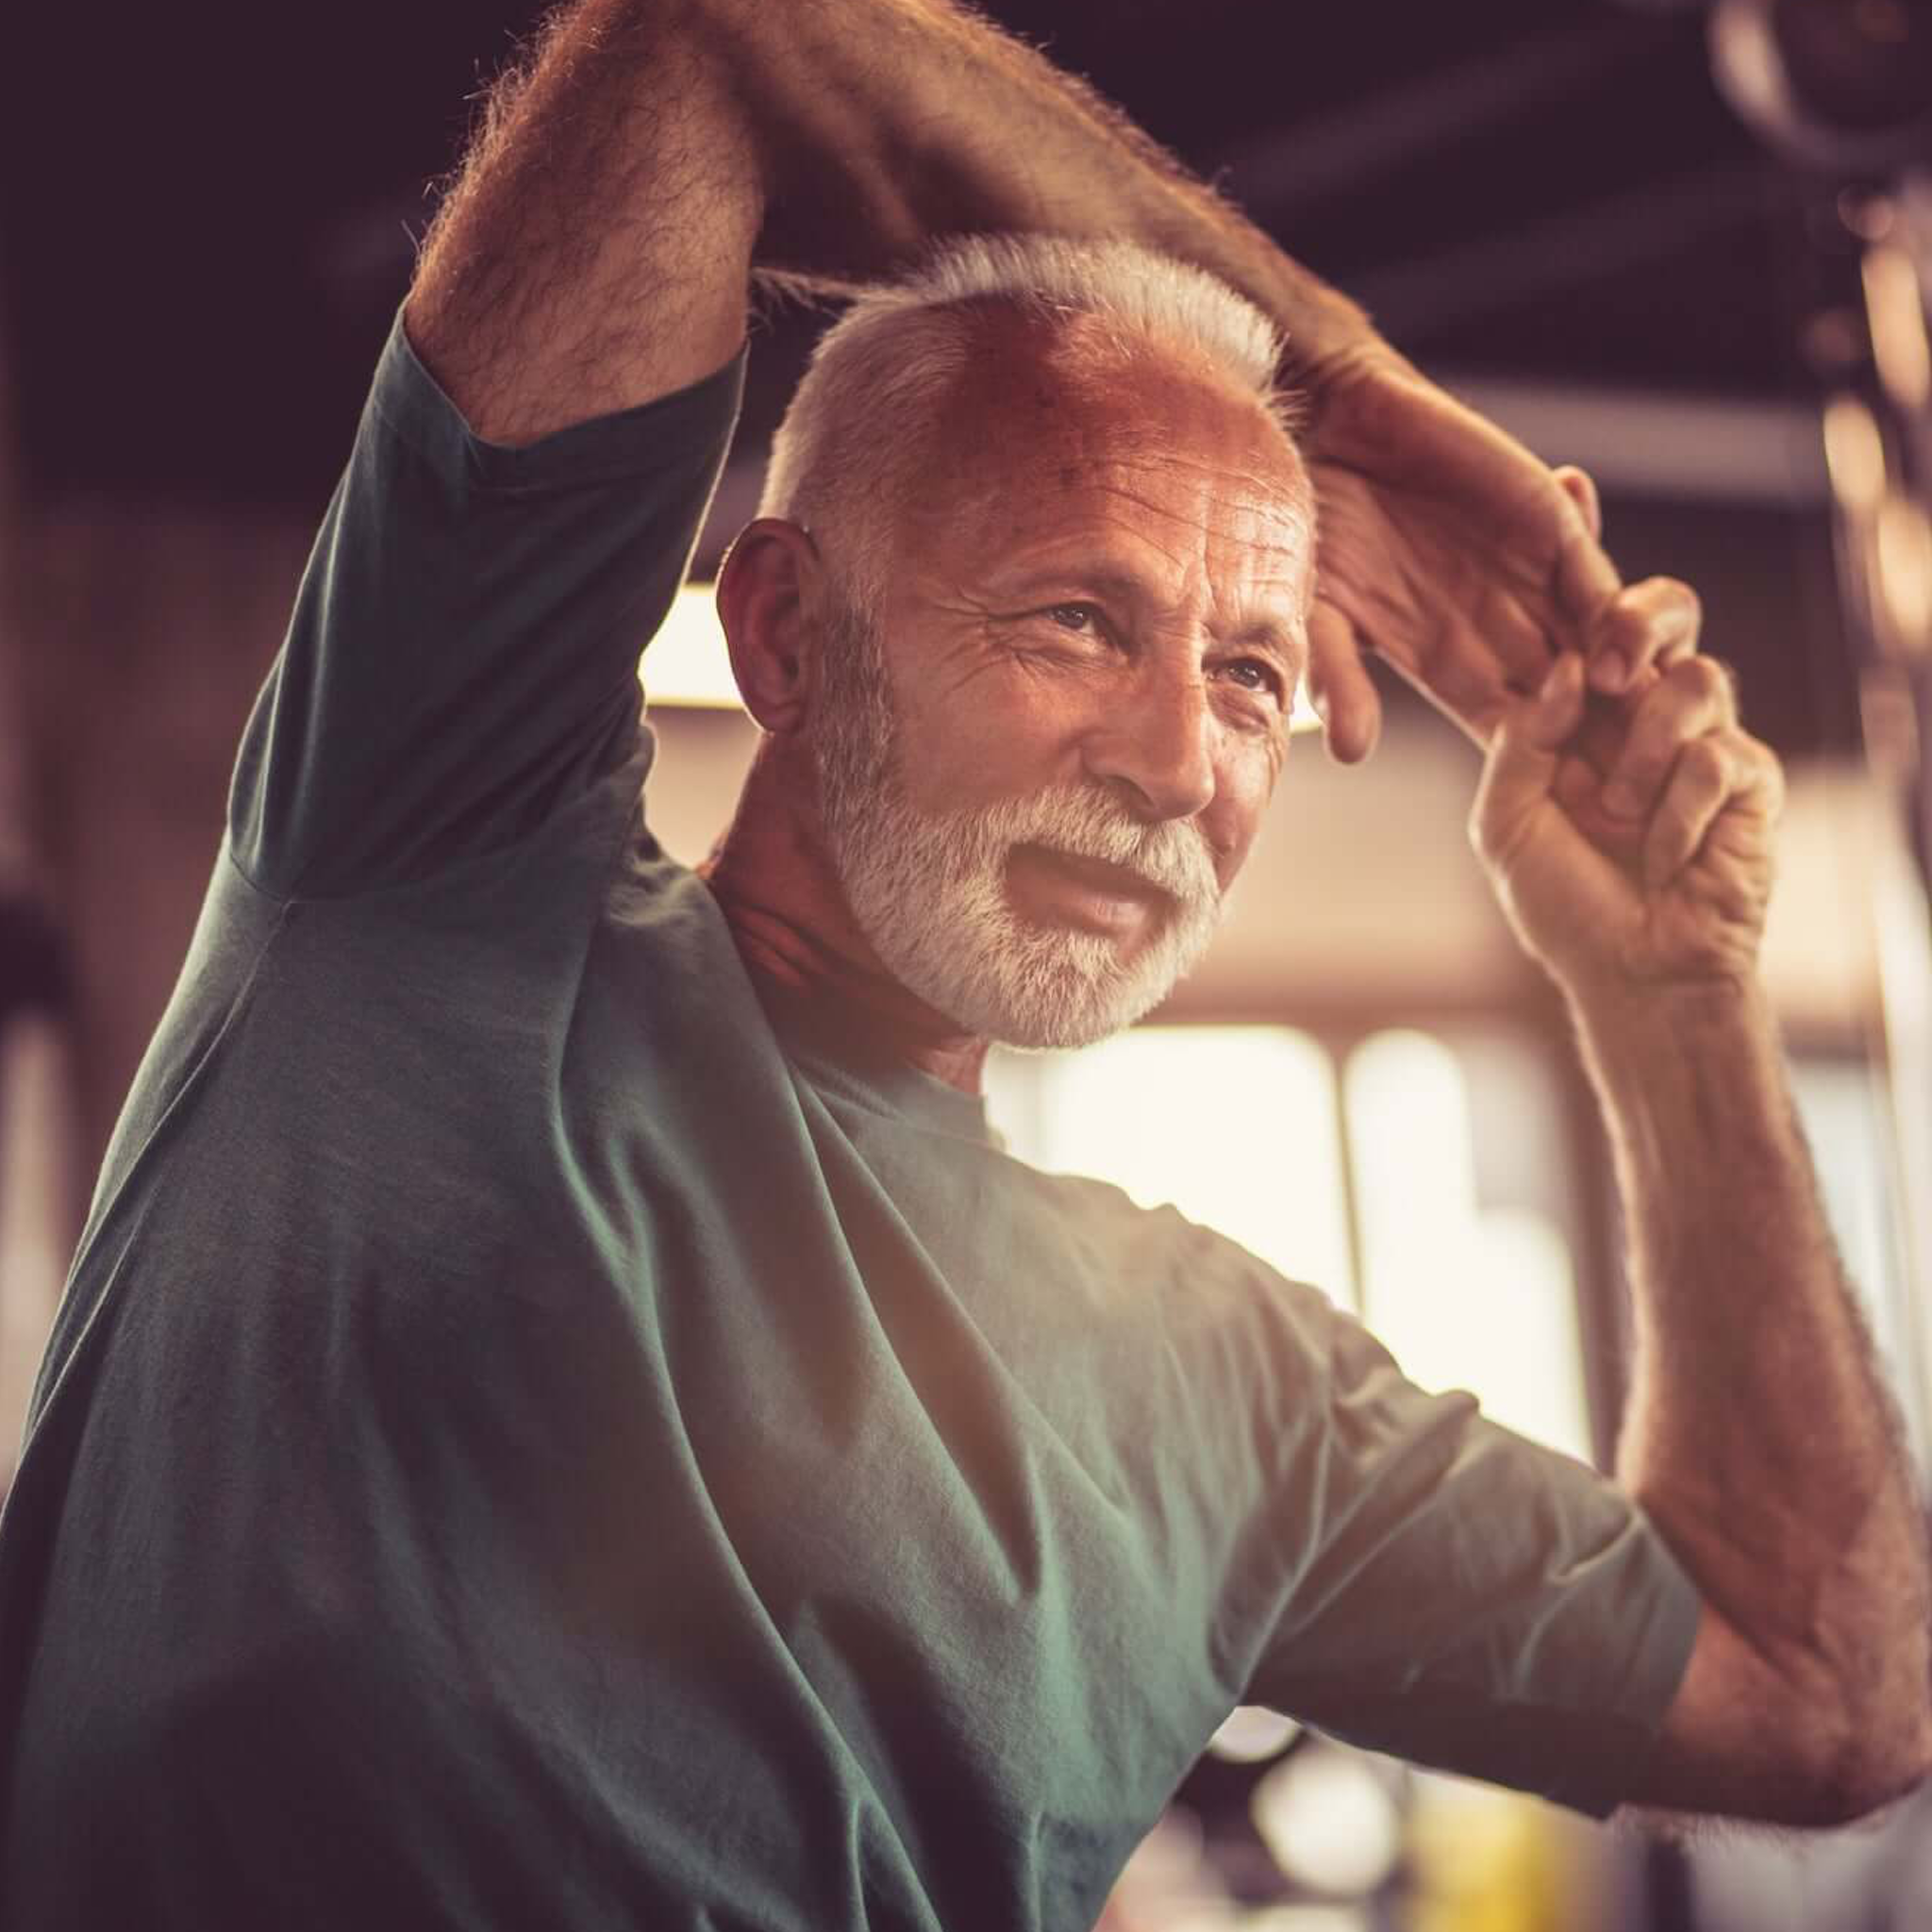 Older gentleman stretching with the benefits of Function Botanicals Full Spectrum CBD products.